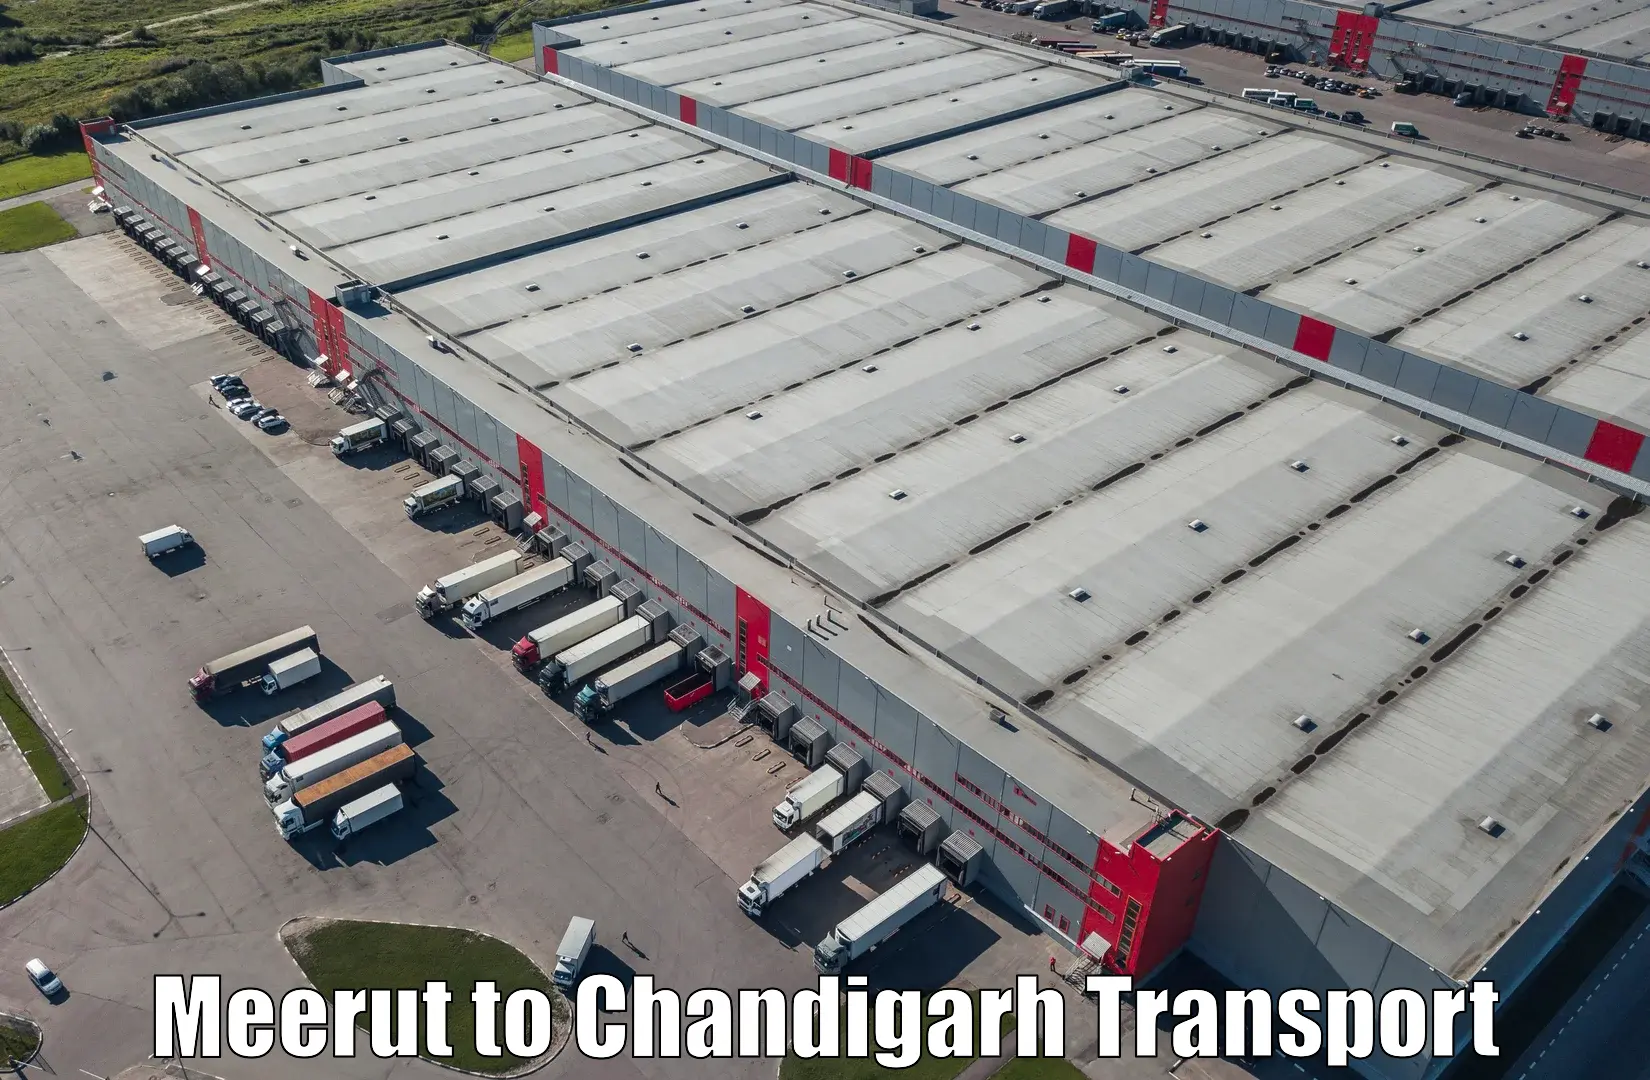 Daily transport service Meerut to Chandigarh